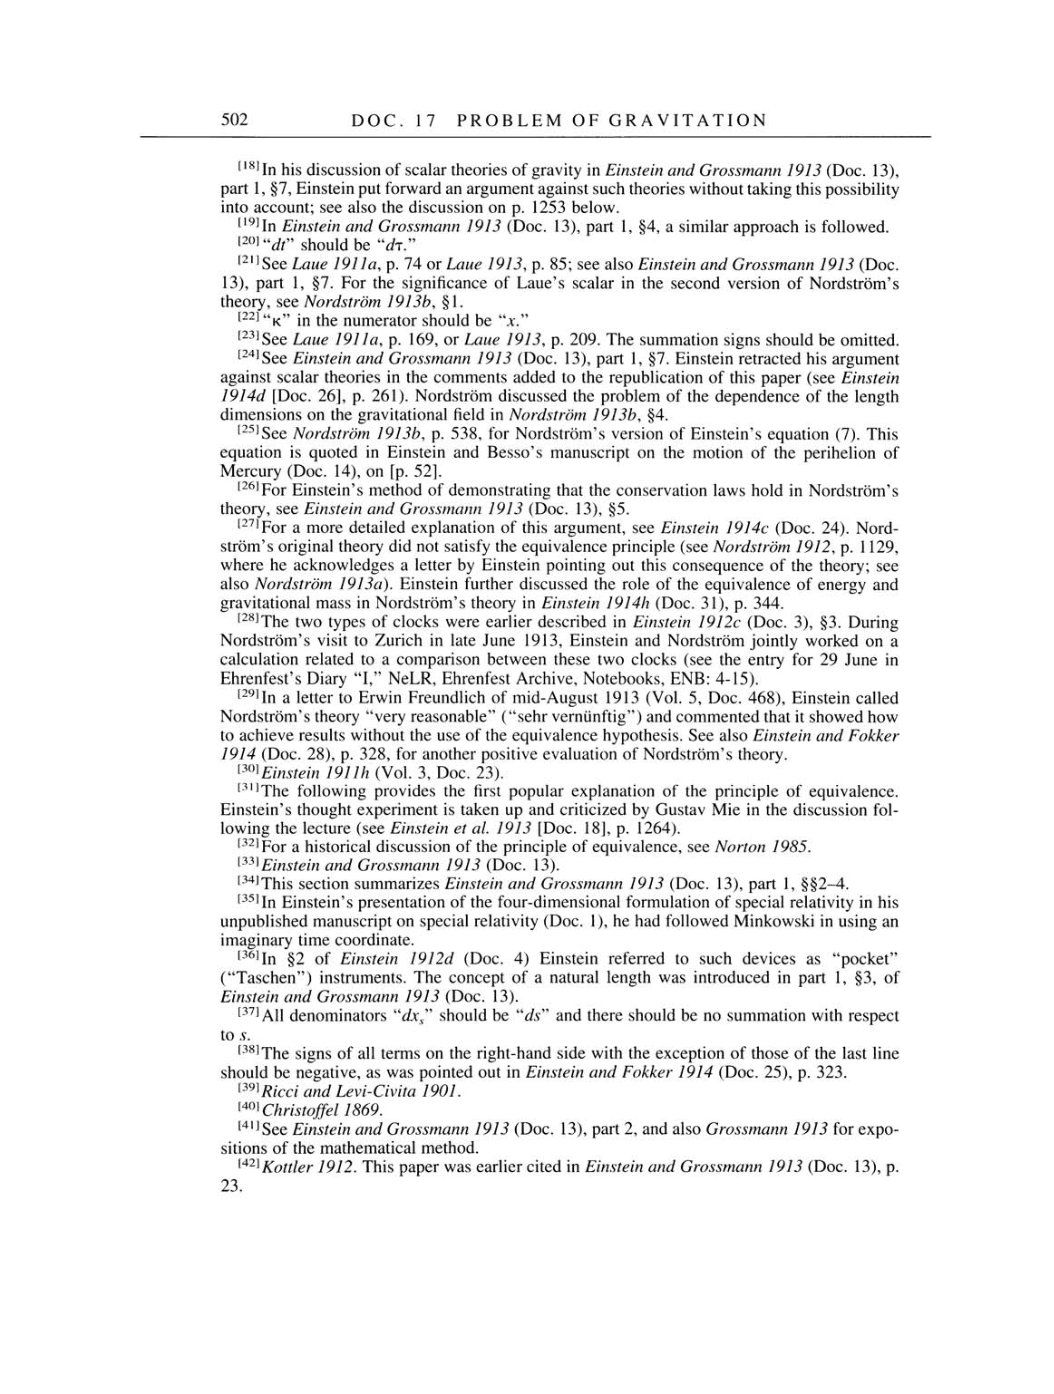 Volume 4: The Swiss Years: Writings 1912-1914 page 502